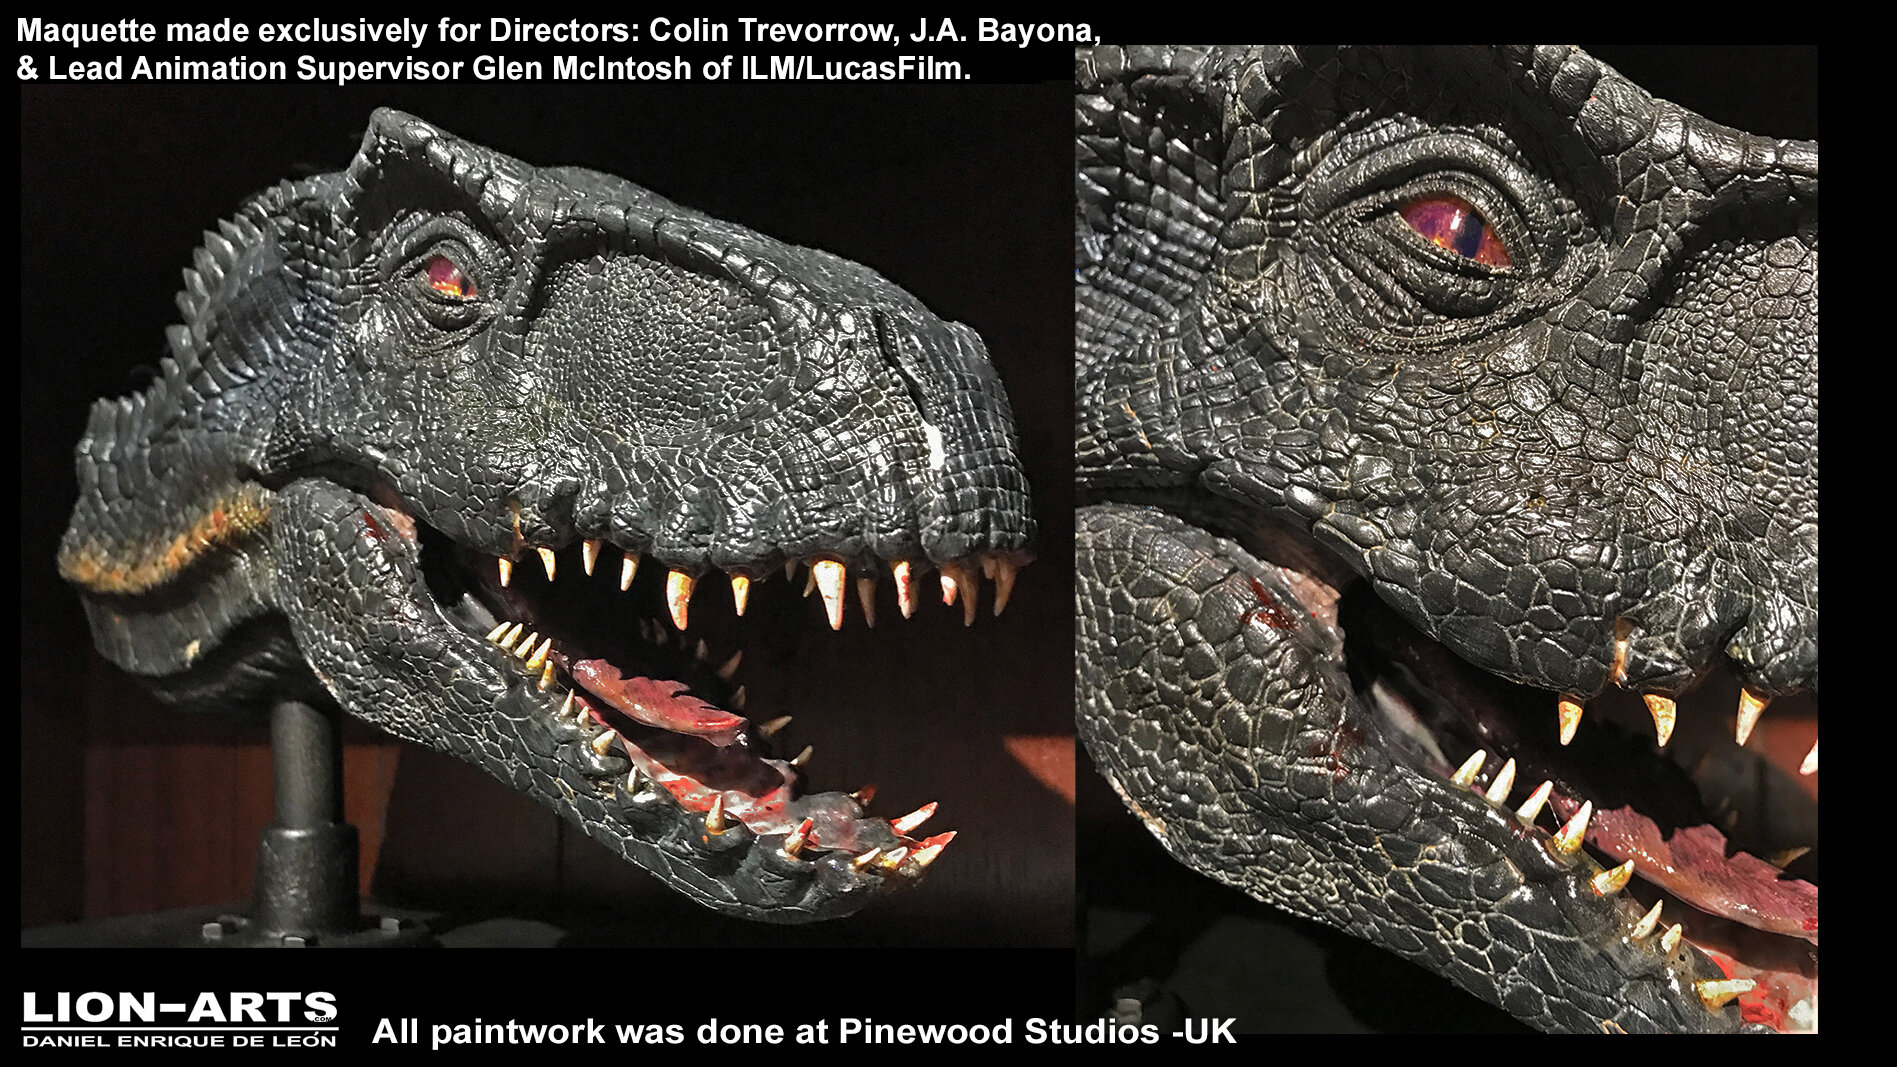  Photos of the physical 3D Printed maquette made exclusively for Directors: Colin Trevorrow,  J.A. Bayona, &amp; Lead Animation Supervisor Glen McIntosh of ILM/LucasFilm. 